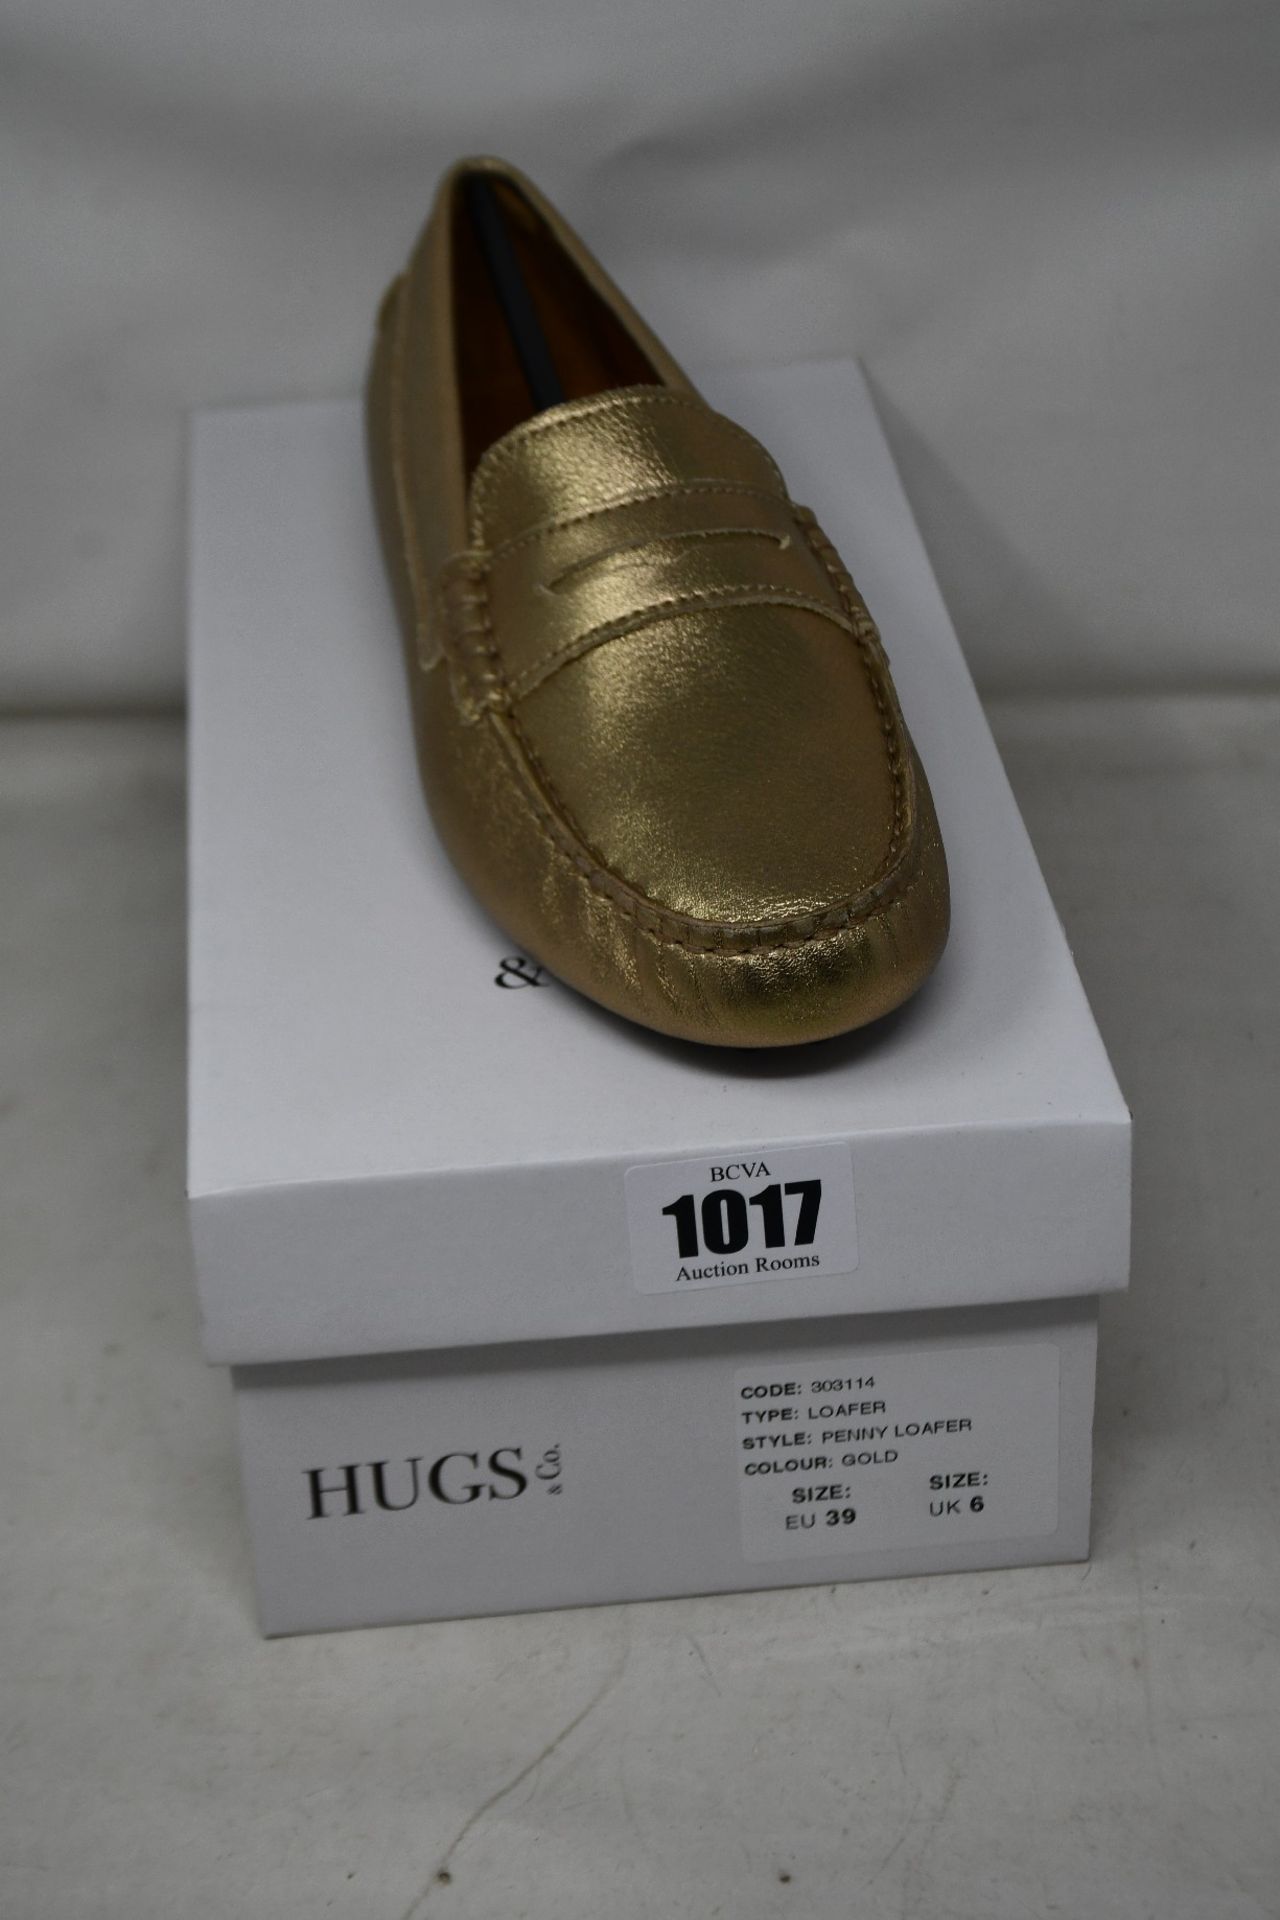 A pair of women's as new Hugs & Co Penny driving loafers (UK 6).